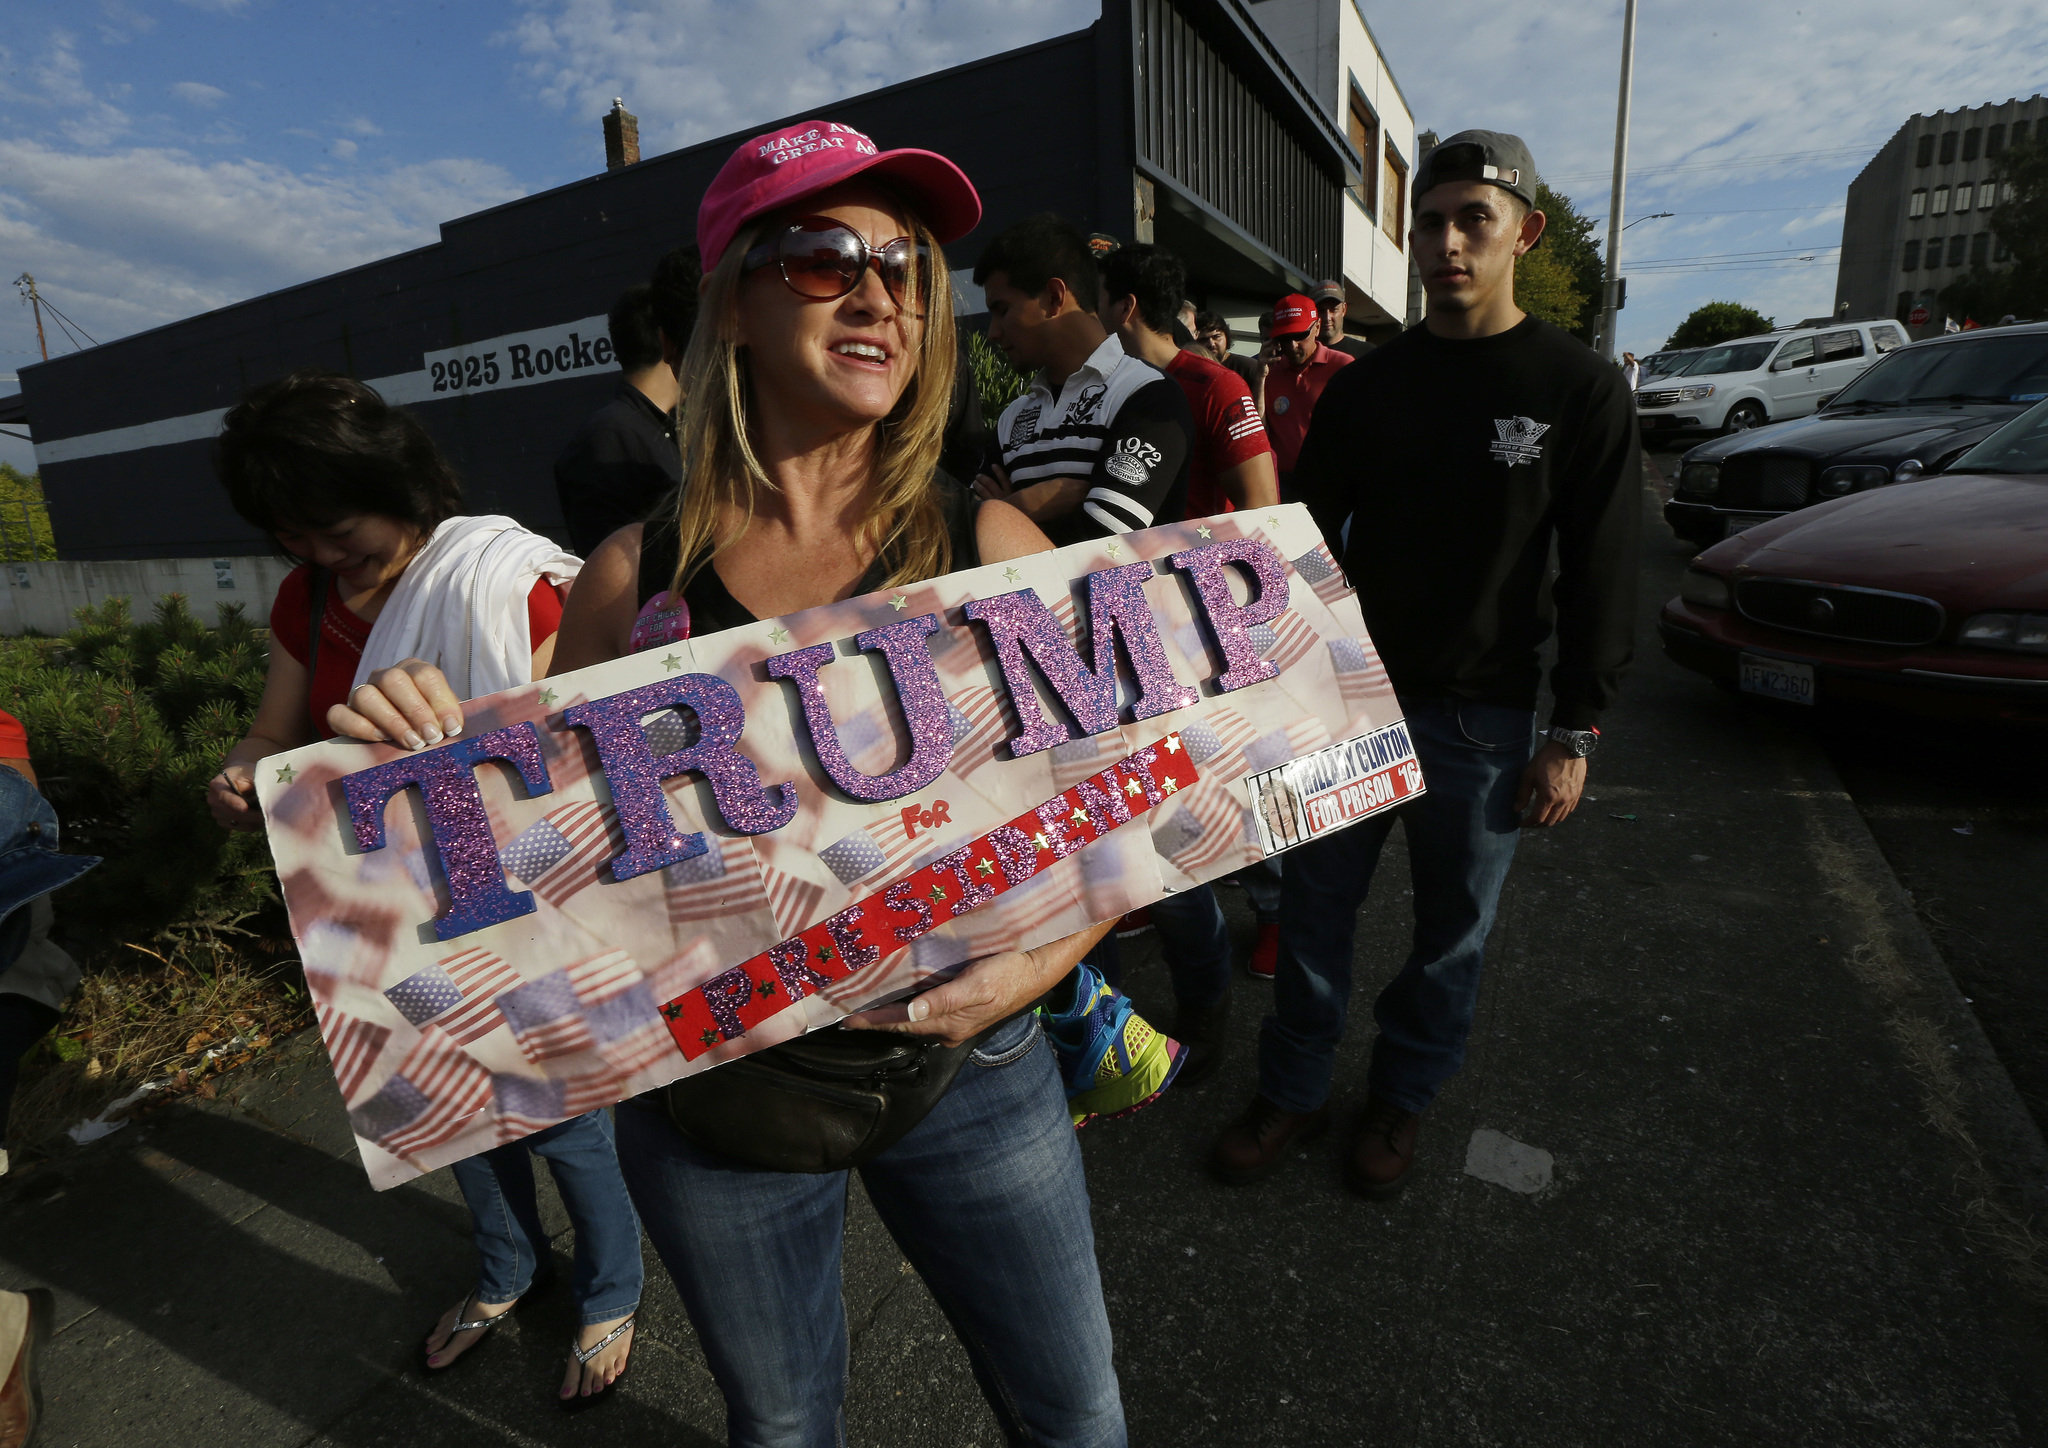 Marcyann Ritchie, of Snohomish holds her homemade sign supporting Republican presidential candidate Donald Trump as she waits in line Tuesday for a Trump rally in Everett. (Ted S. Warren/The Associated Press)